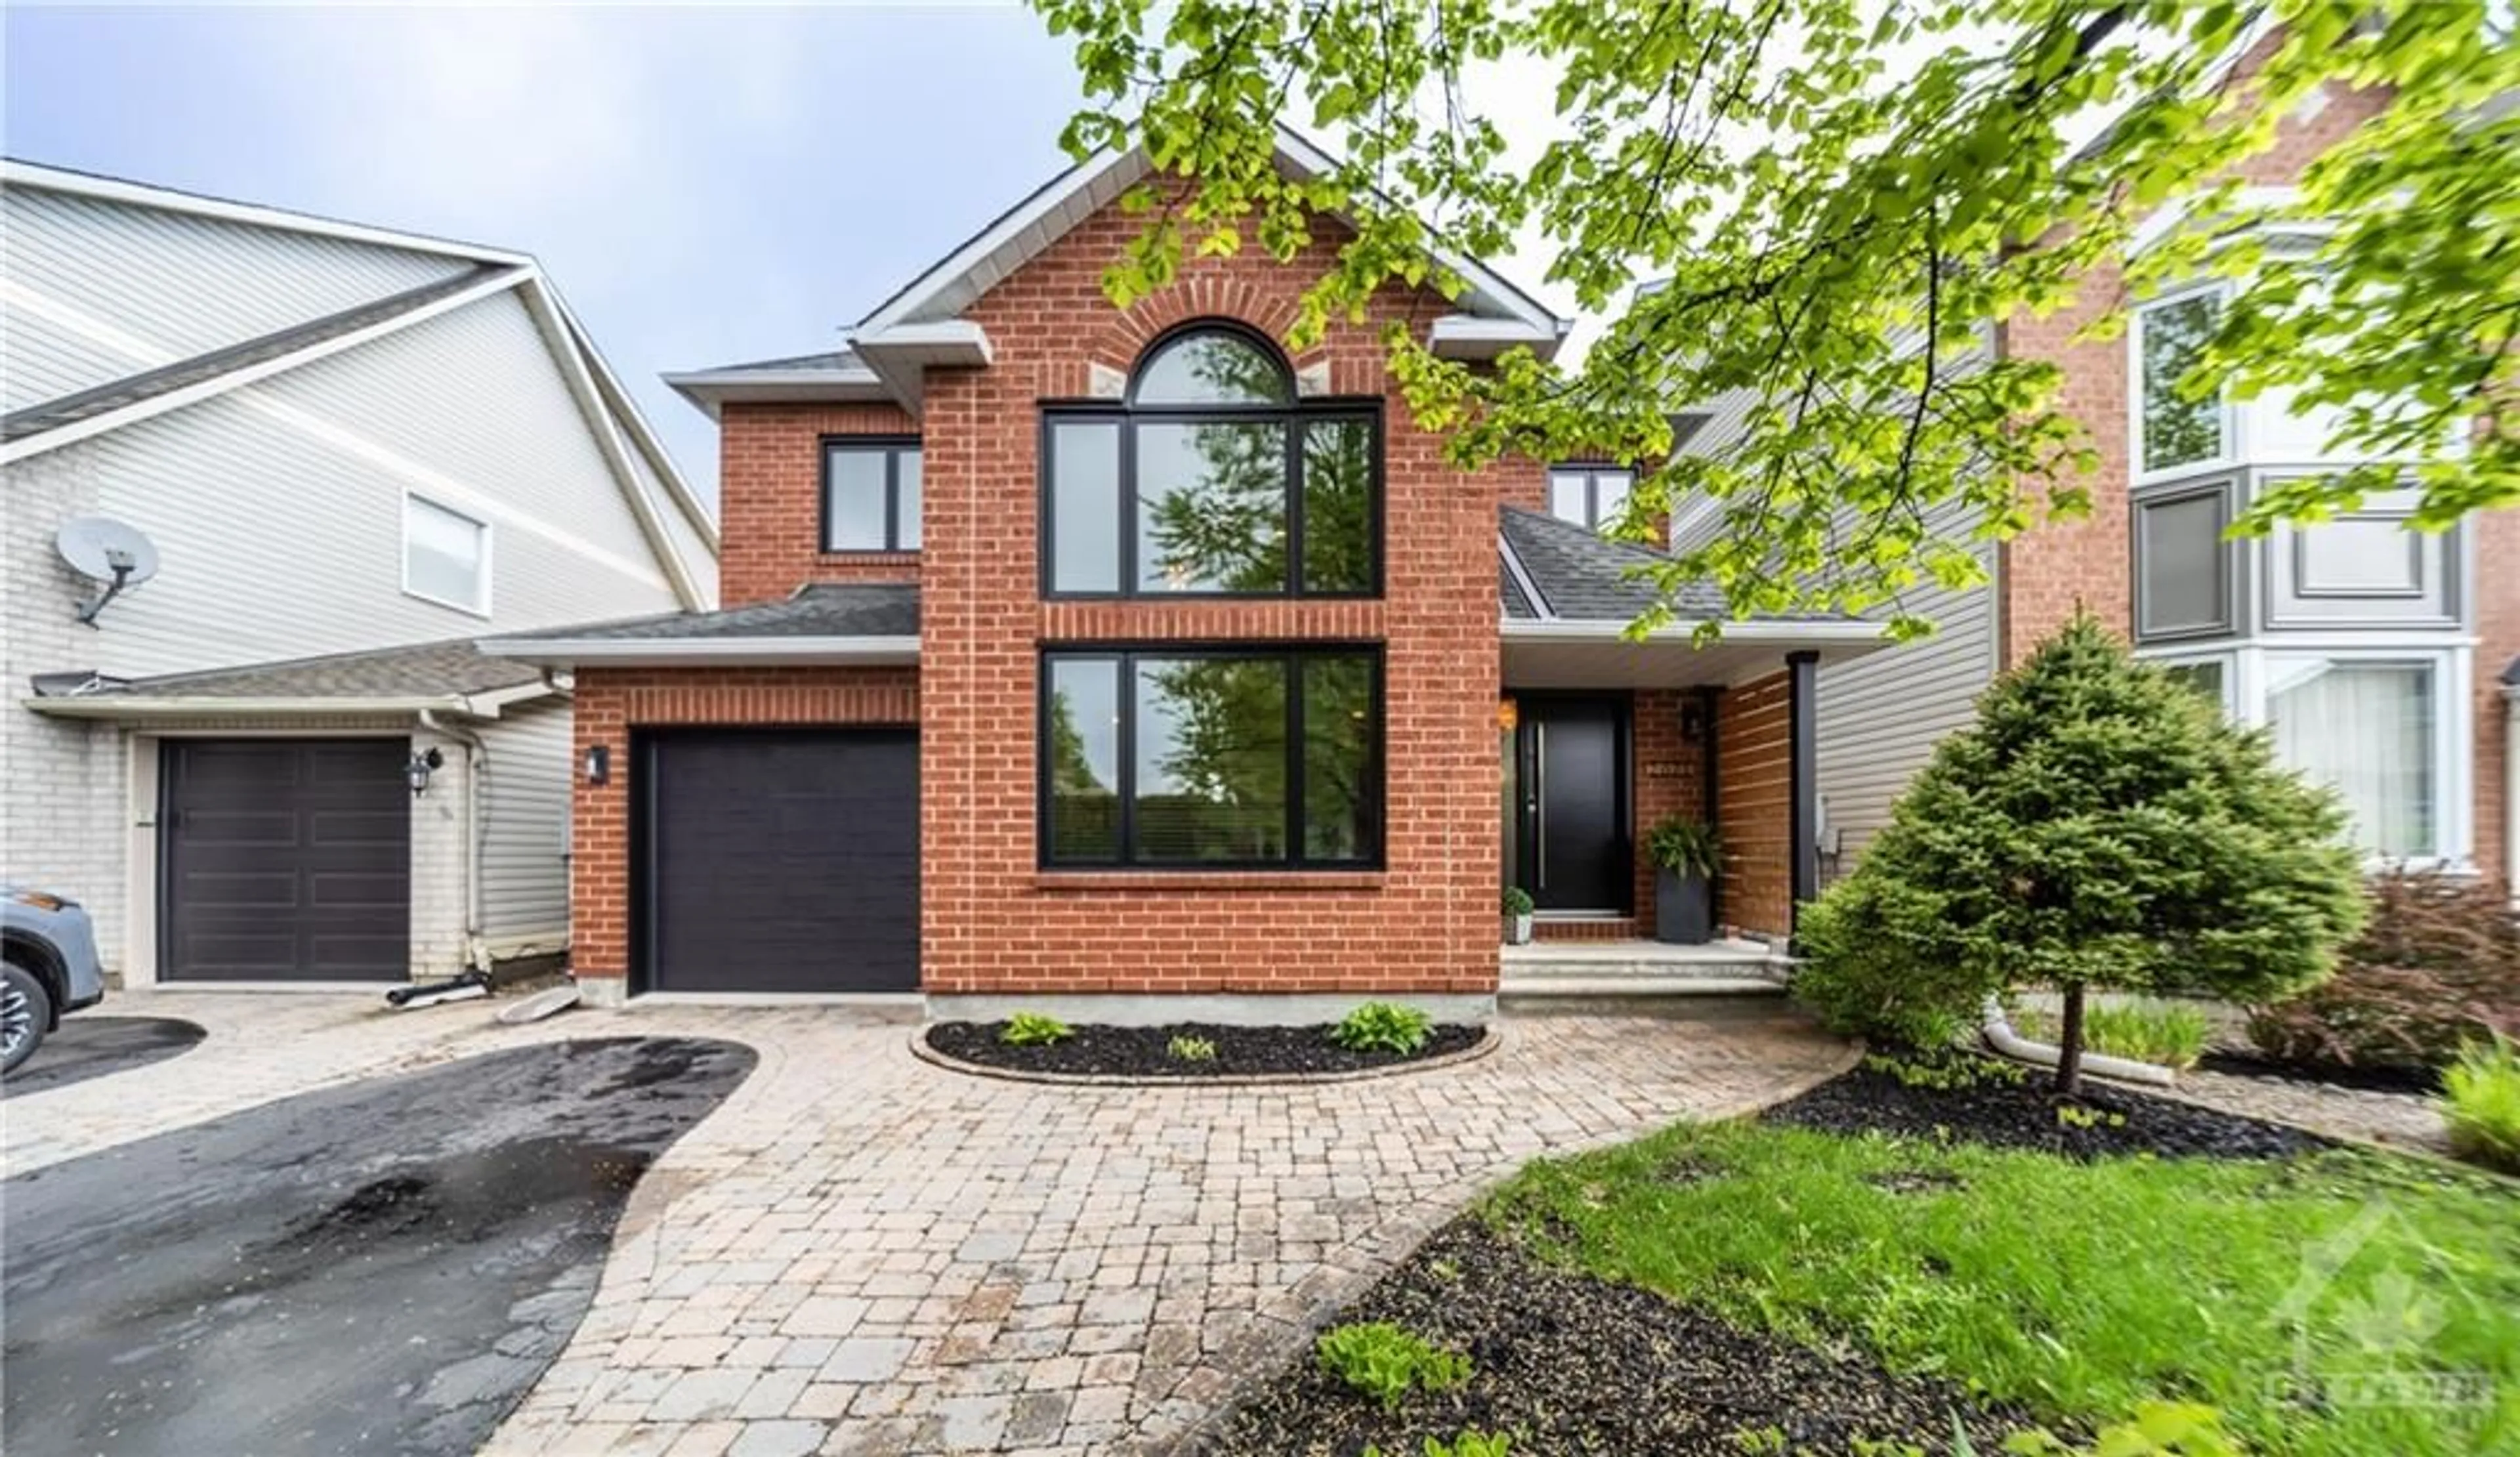 Home with brick exterior material for 2071 OAKBROOK Cir, Ottawa Ontario K1W 1H4